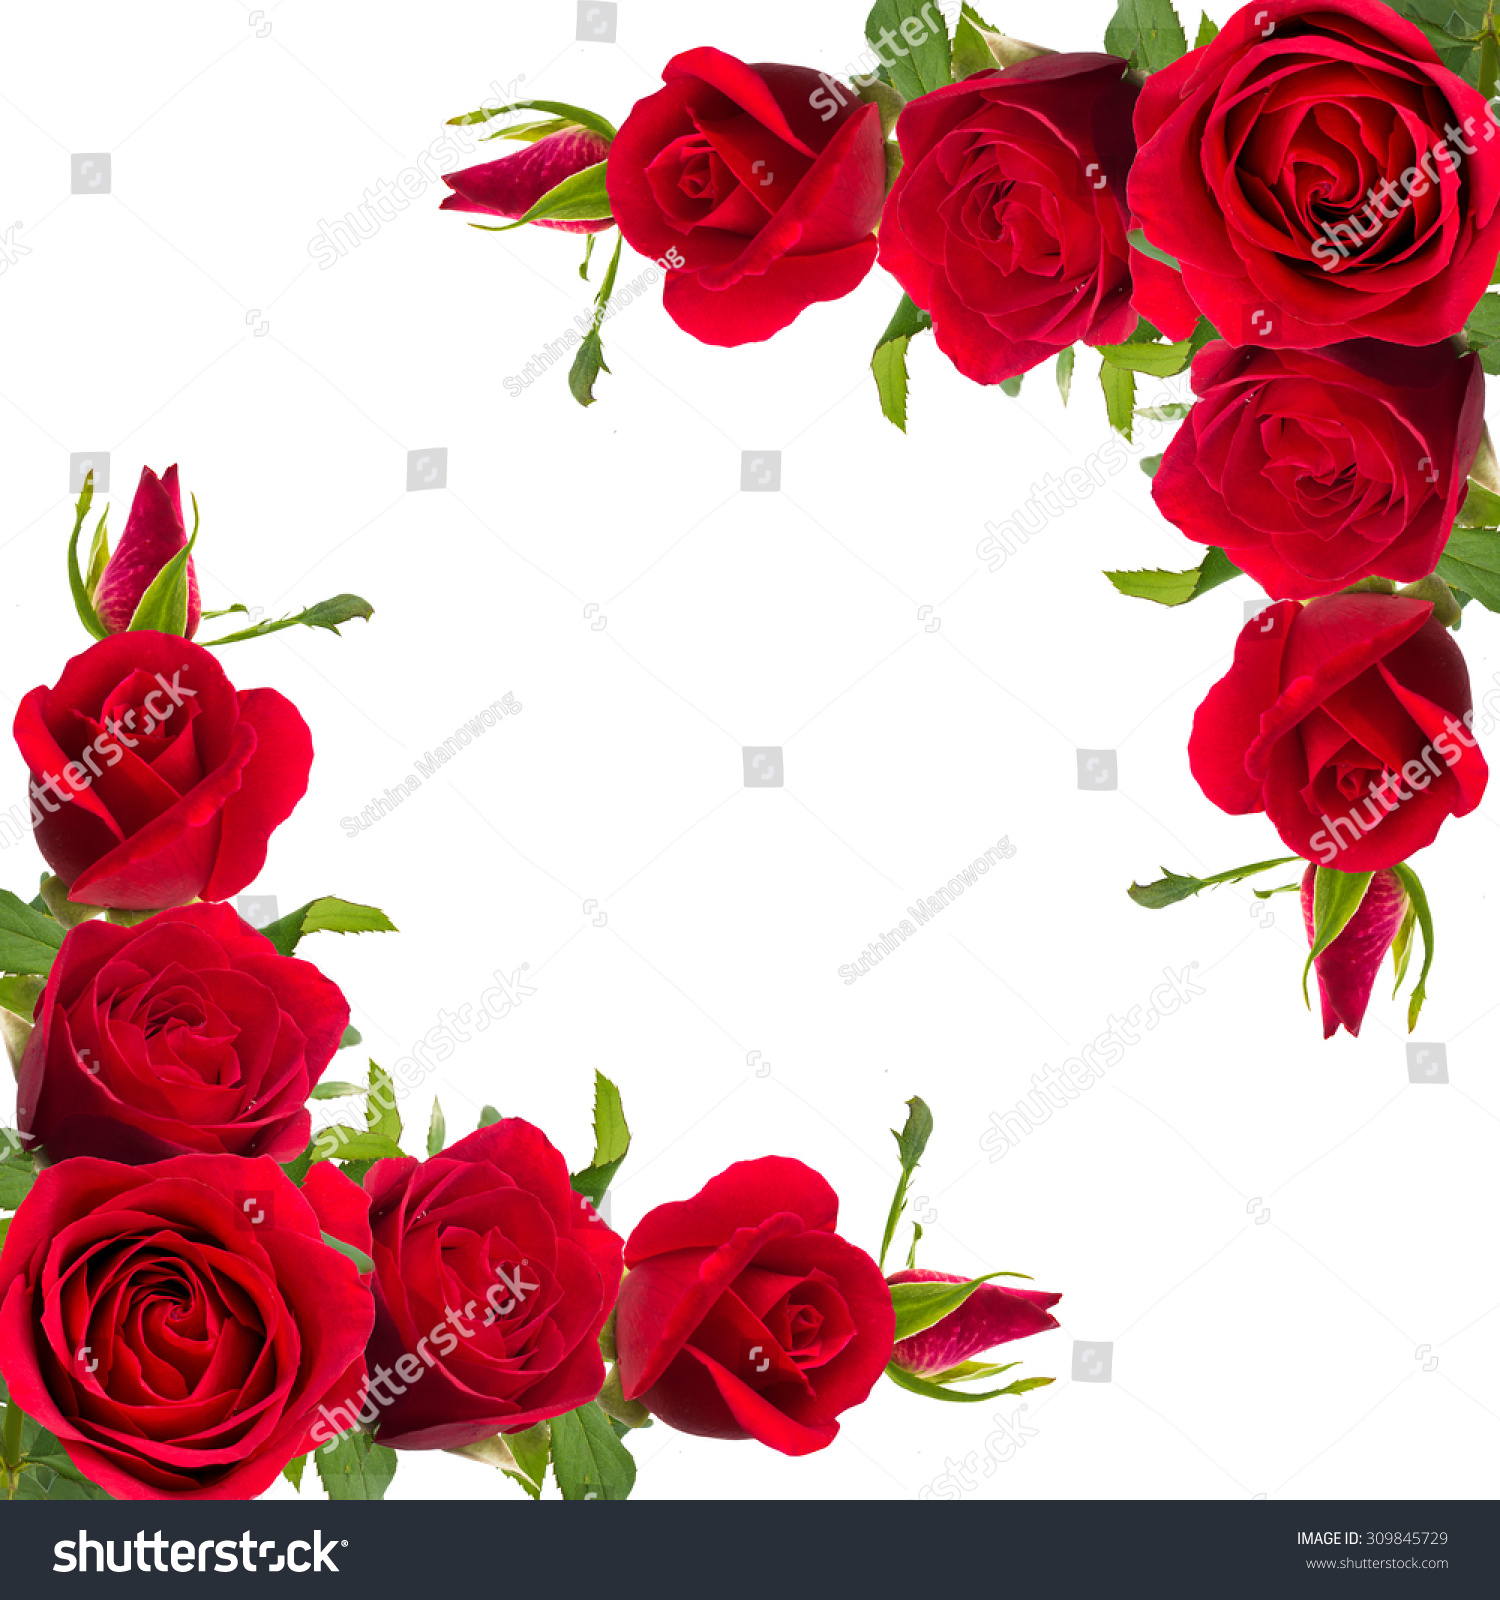 Bouquet Red Roses On White Background Stock Photo 309845729 | Shutterstock